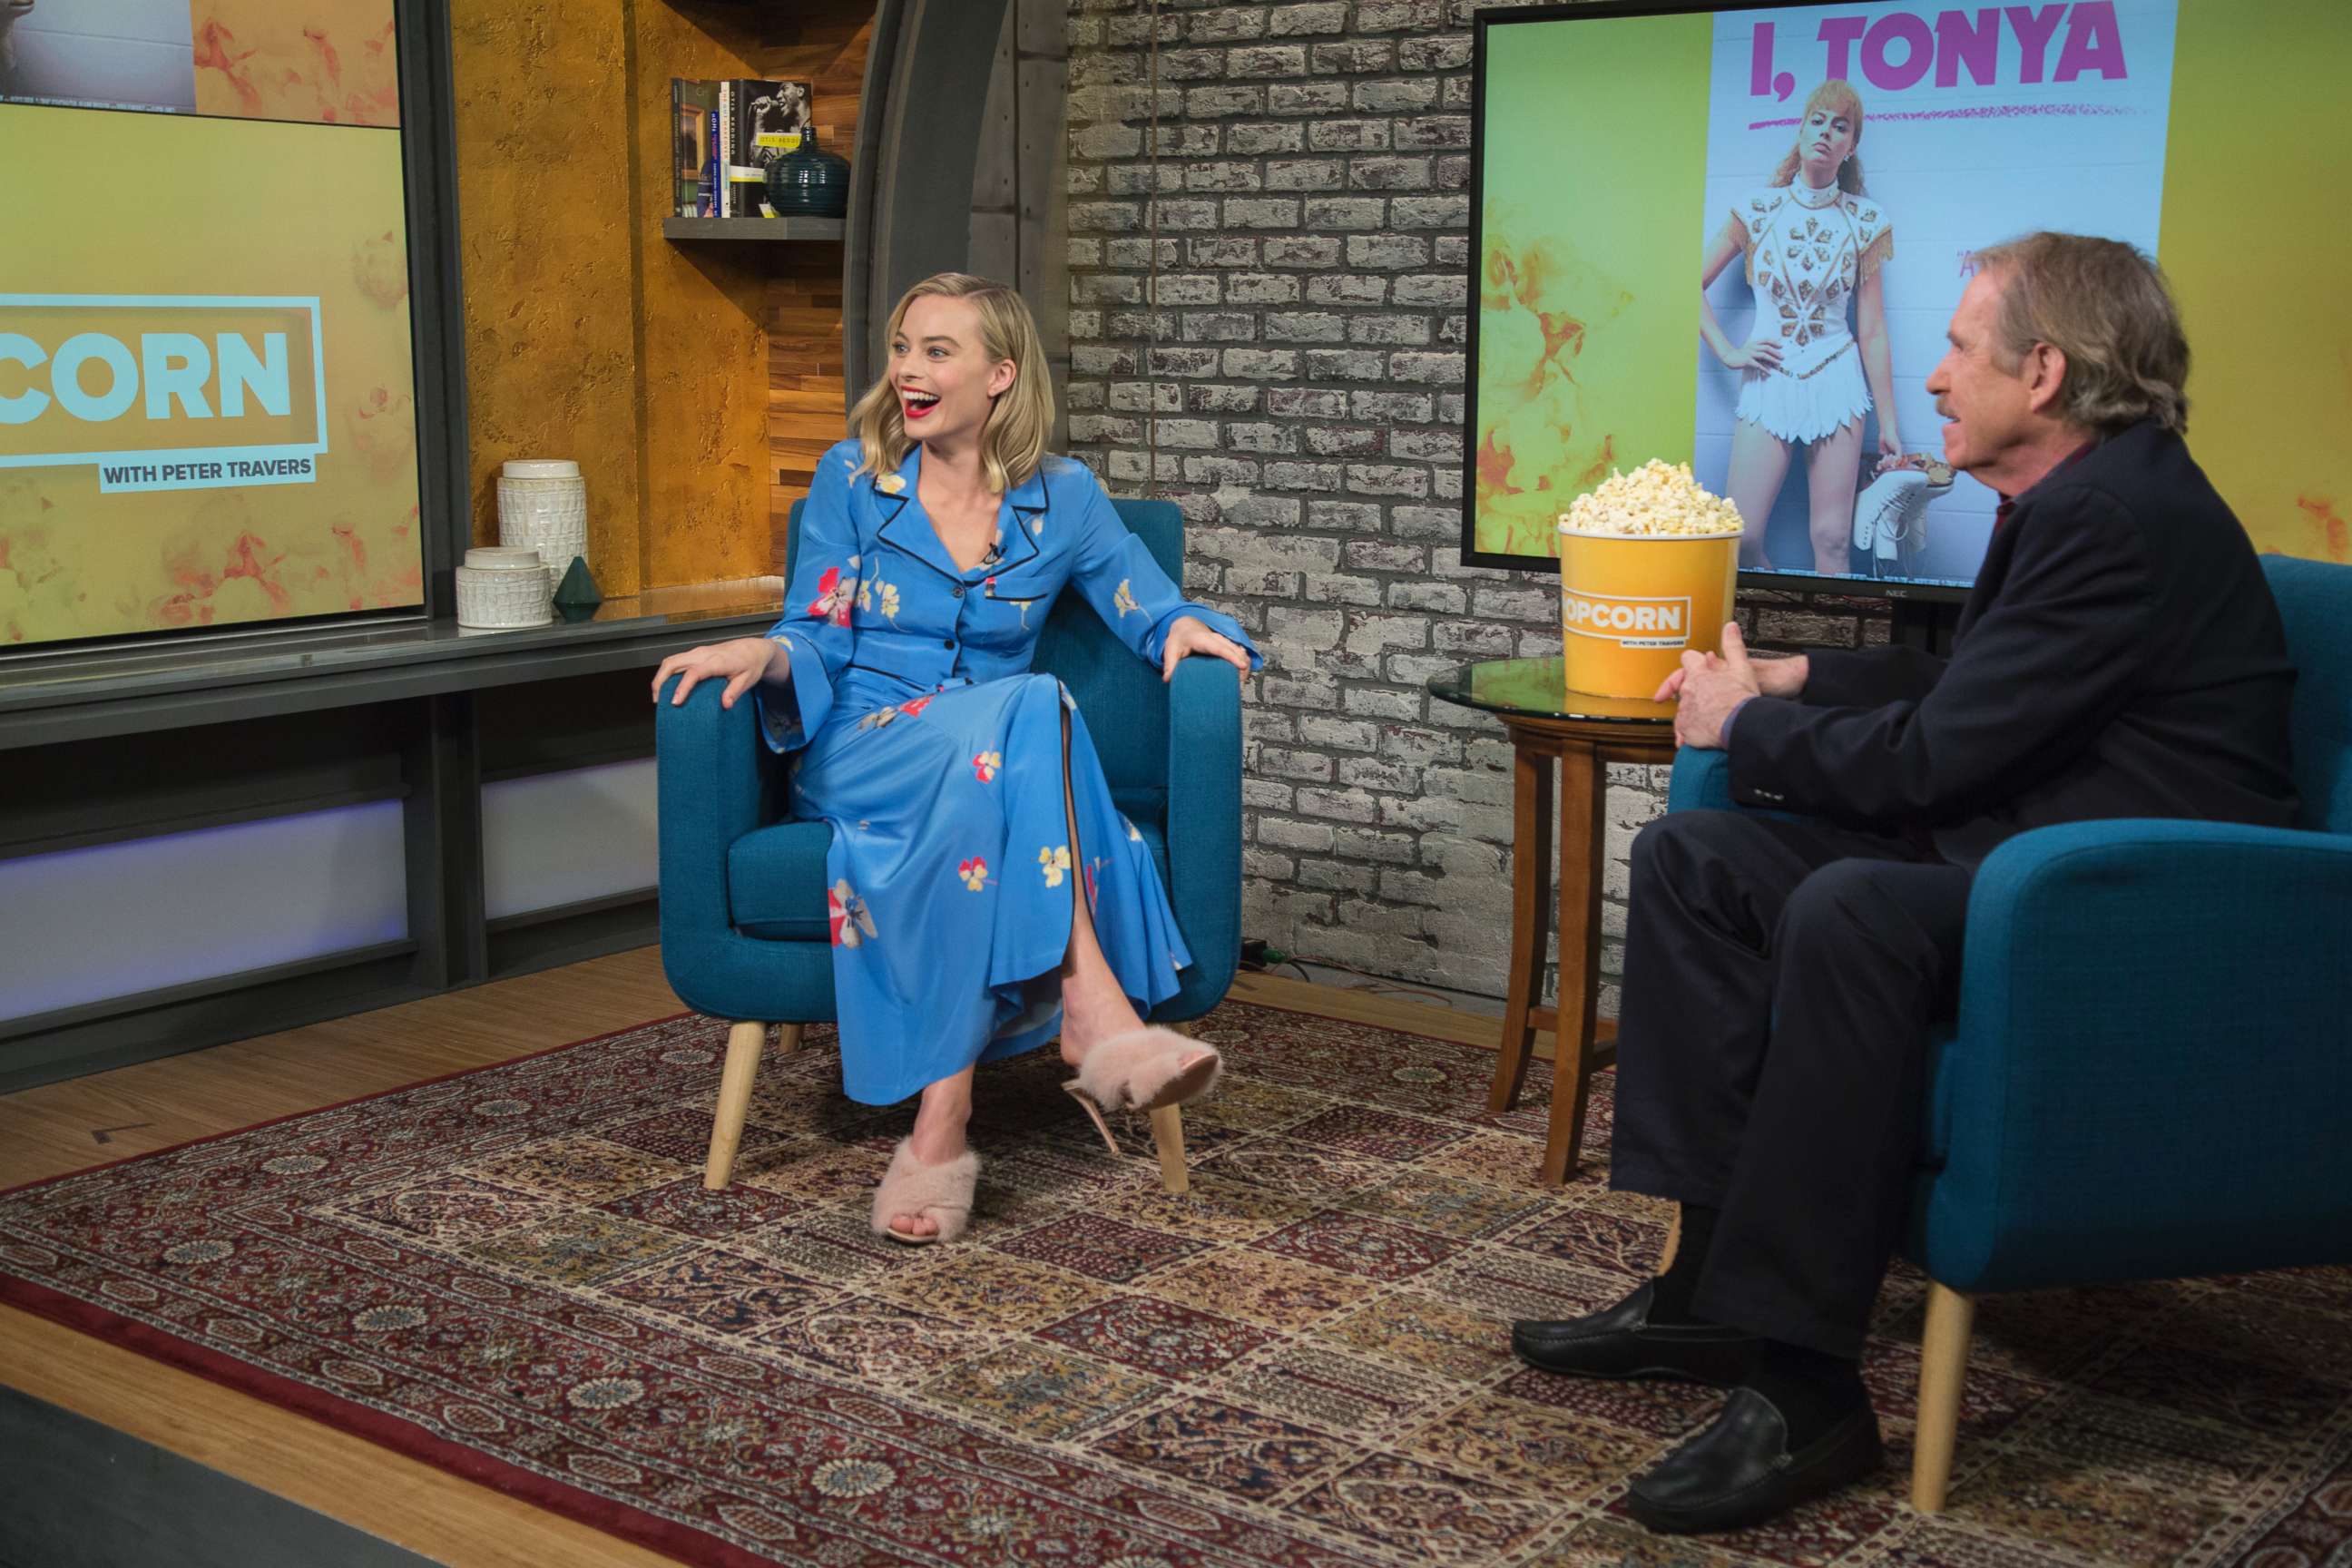 PHOTO: Margot Robbie found out about her SAG Awards best actress nomination for "I, Tonya" during her interview on ABC News' "Popcorn With Peter Travers."